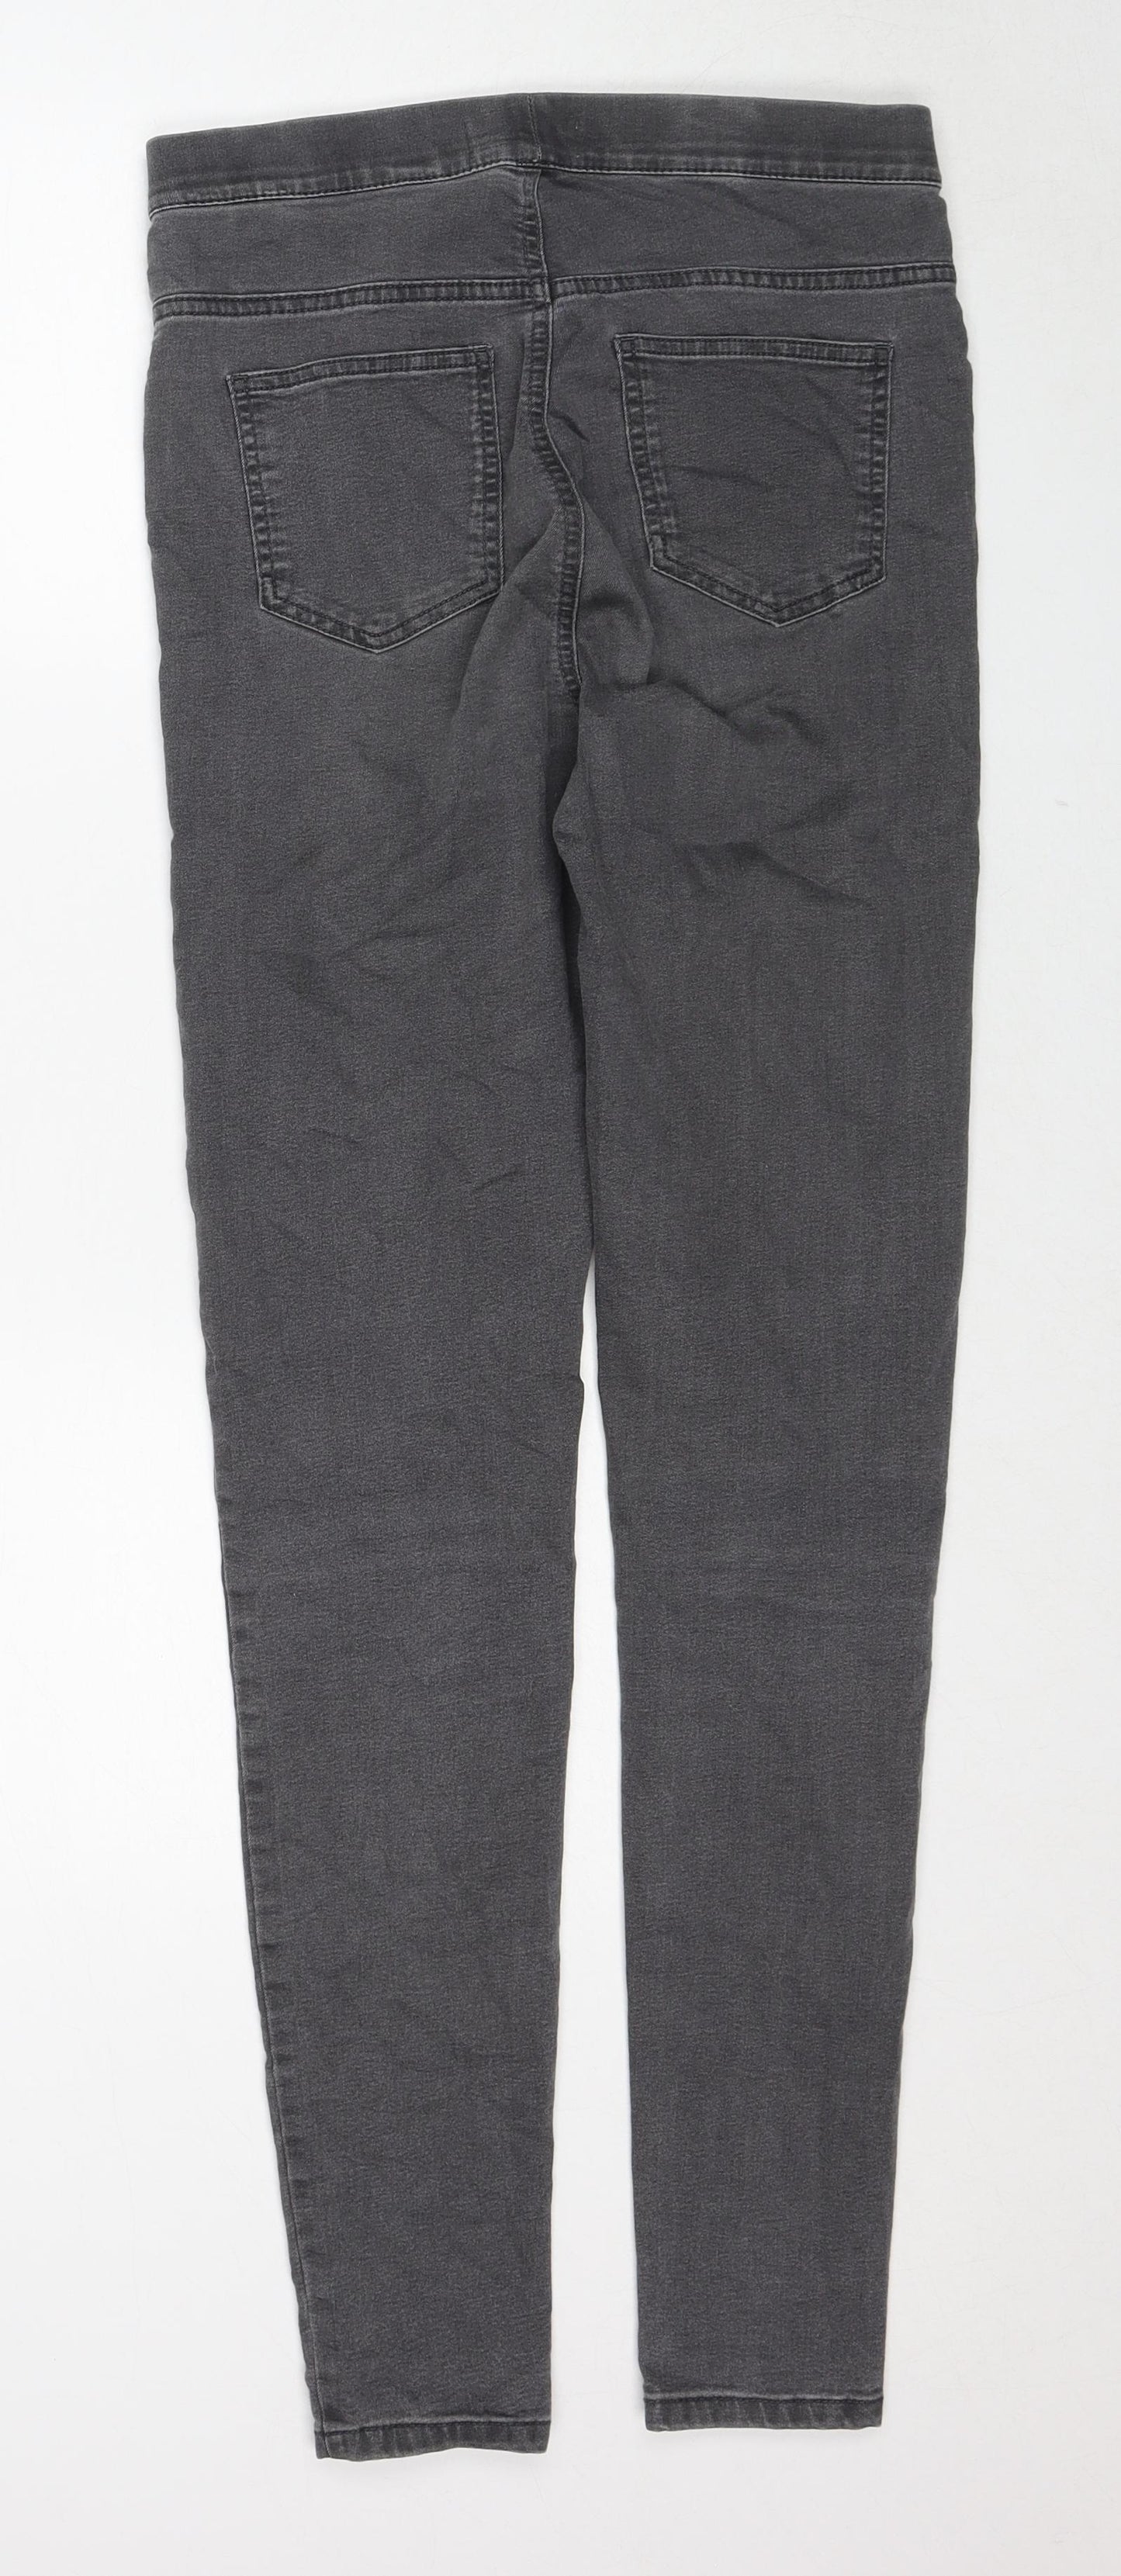 Marks and Spencer Womens Grey Cotton Jegging Jeans Size 10 Regular Zip